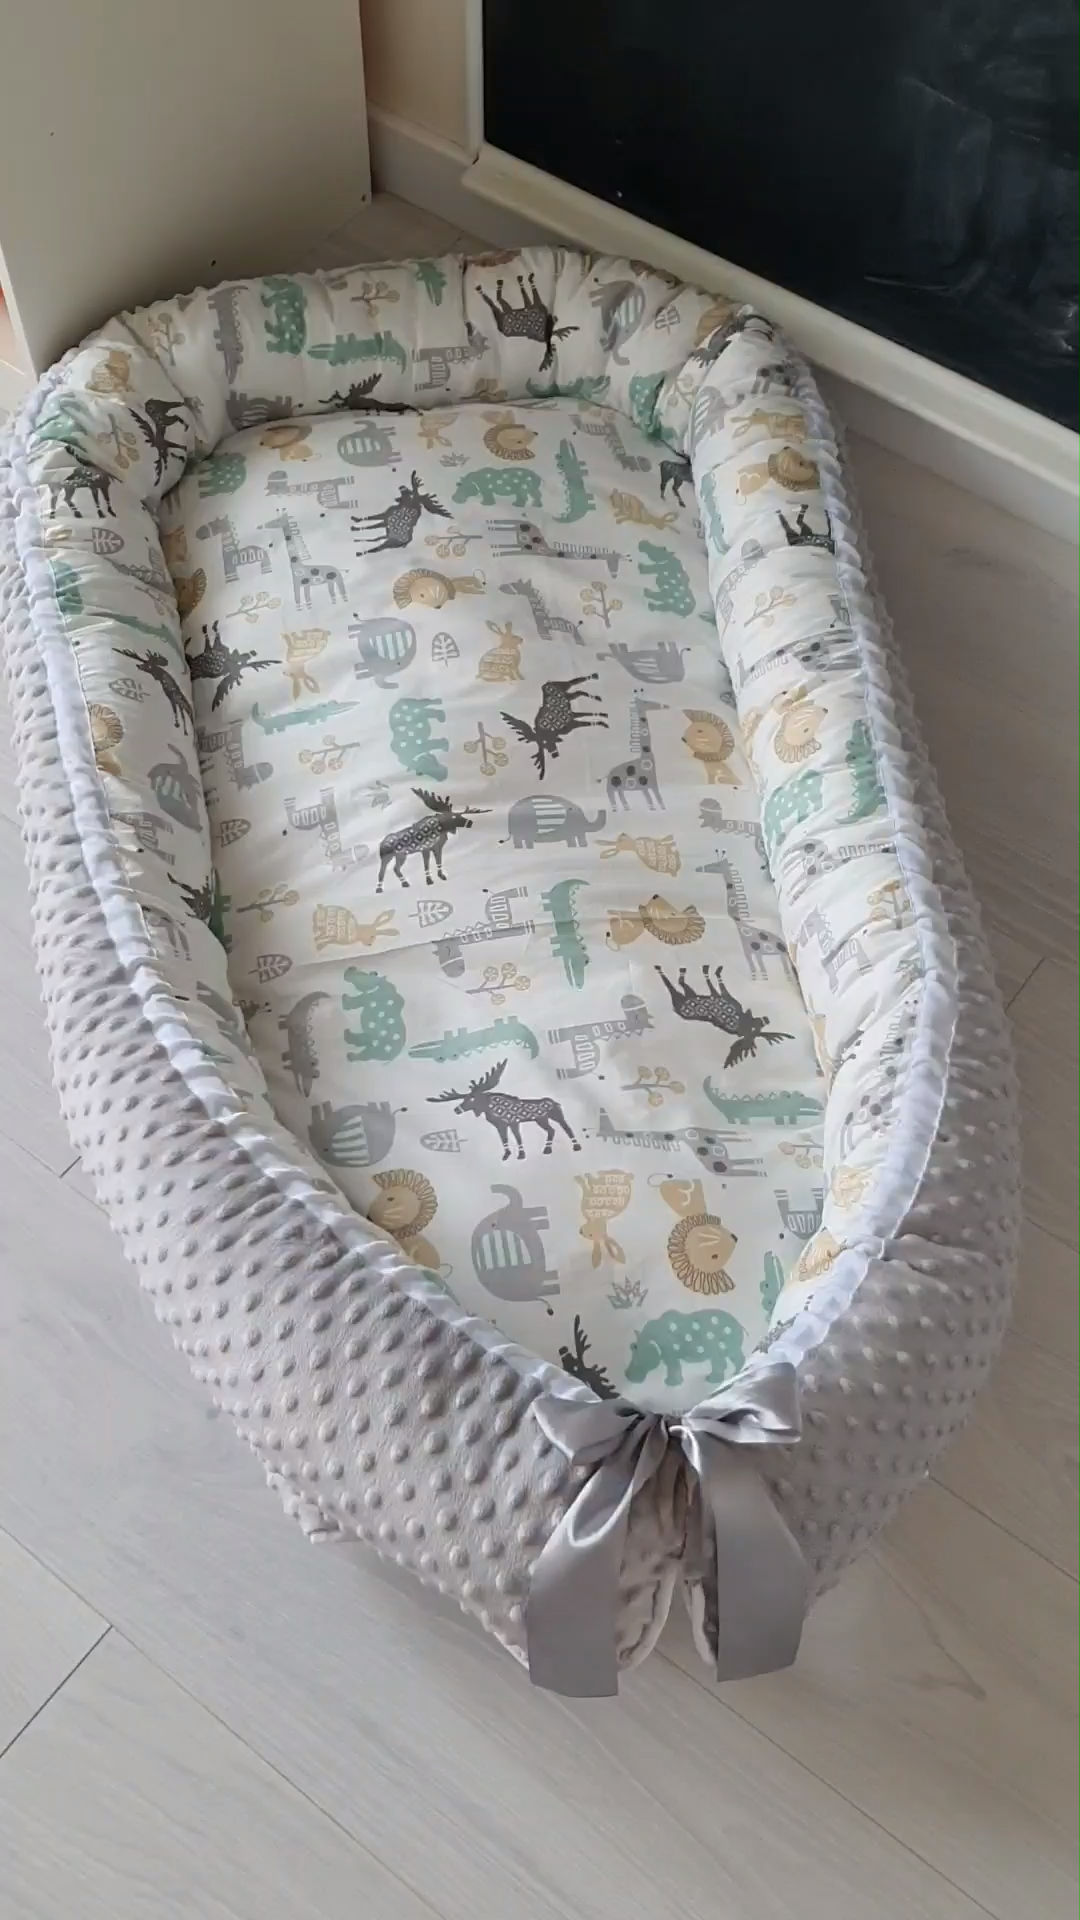 Baby nest Baby cocoon Baby nest bed with zoo animals Woodland nursery Newborn lounger Cosleeper - Baby nest Baby cocoon Baby nest bed with zoo animals Woodland nursery Newborn lounger Cosleeper -   16 diy Baby bed ideas